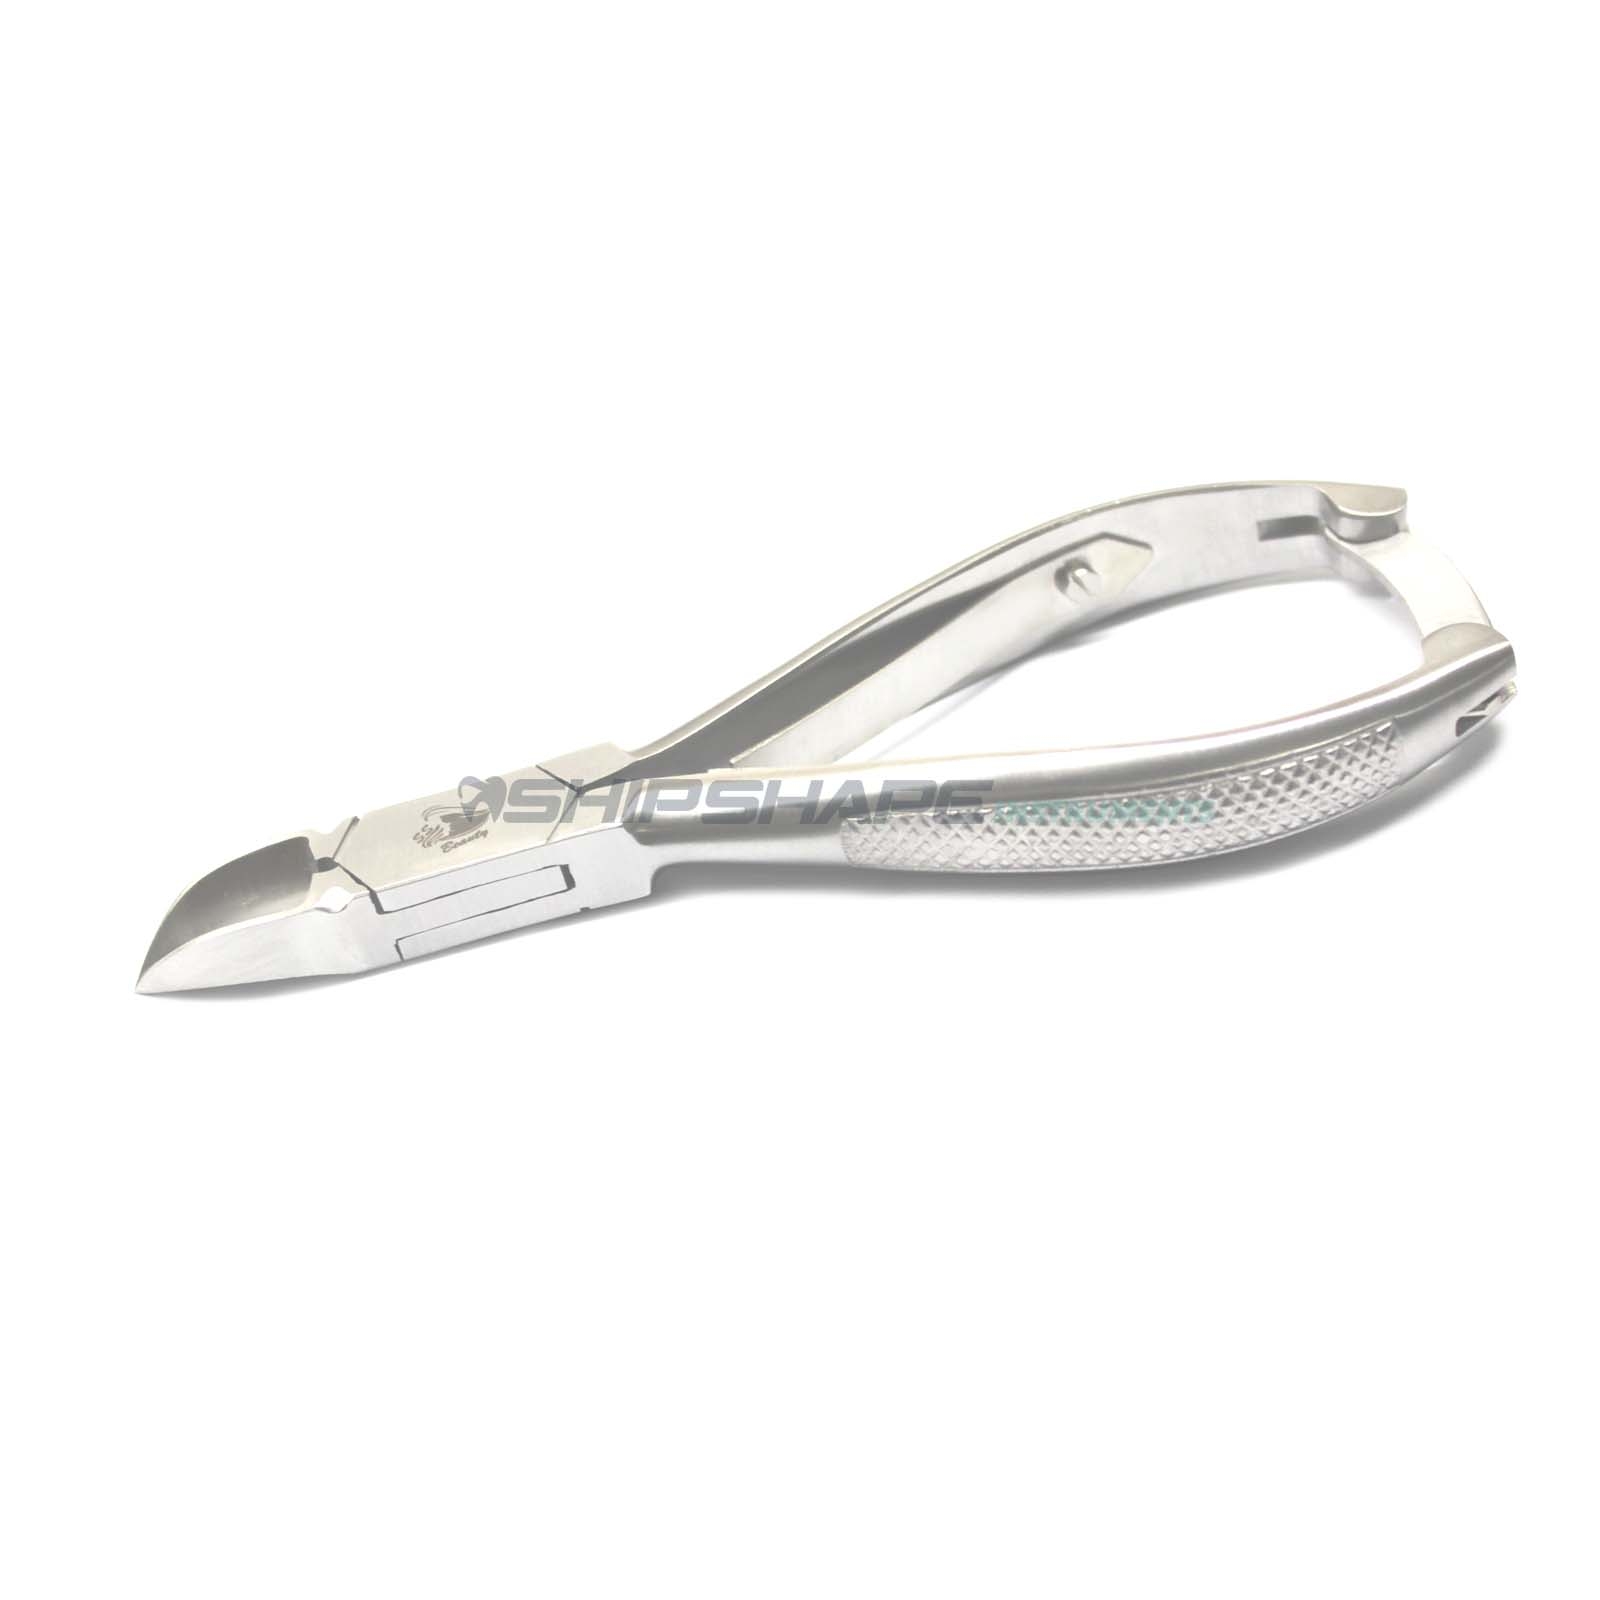 Toe nail Cutters clippers for ingrown toenails - Professional Heavy Duty Surgical Grade Stainless Steel Toe Cutter-1246